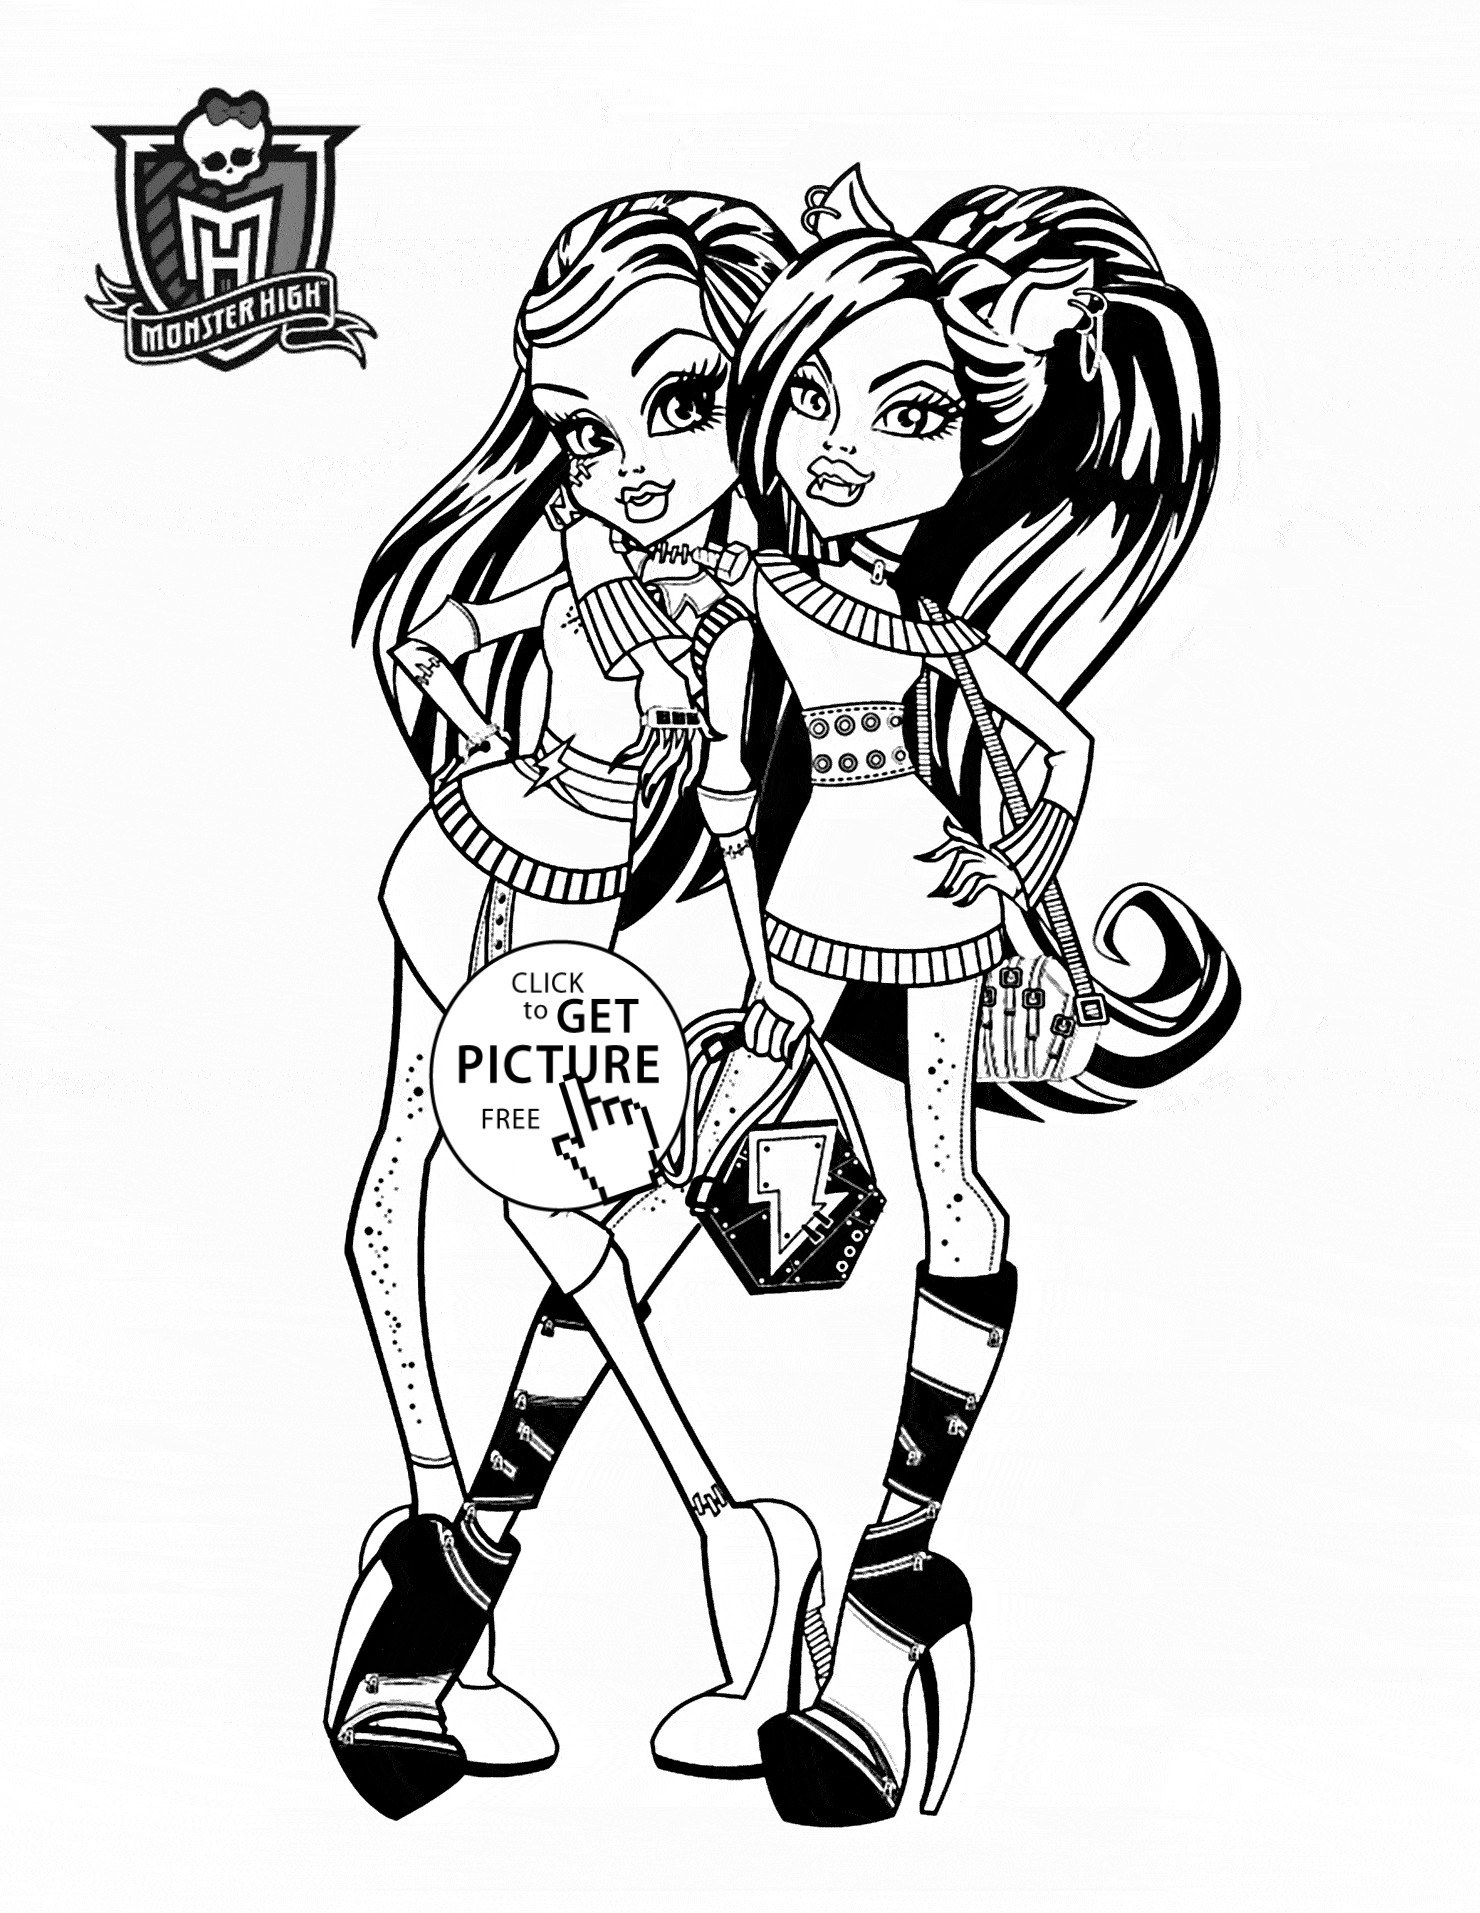 Free Coloring Pages For Girls Monster High
 Frankie Stein and Clawdeen Wolf Monster High coloring page